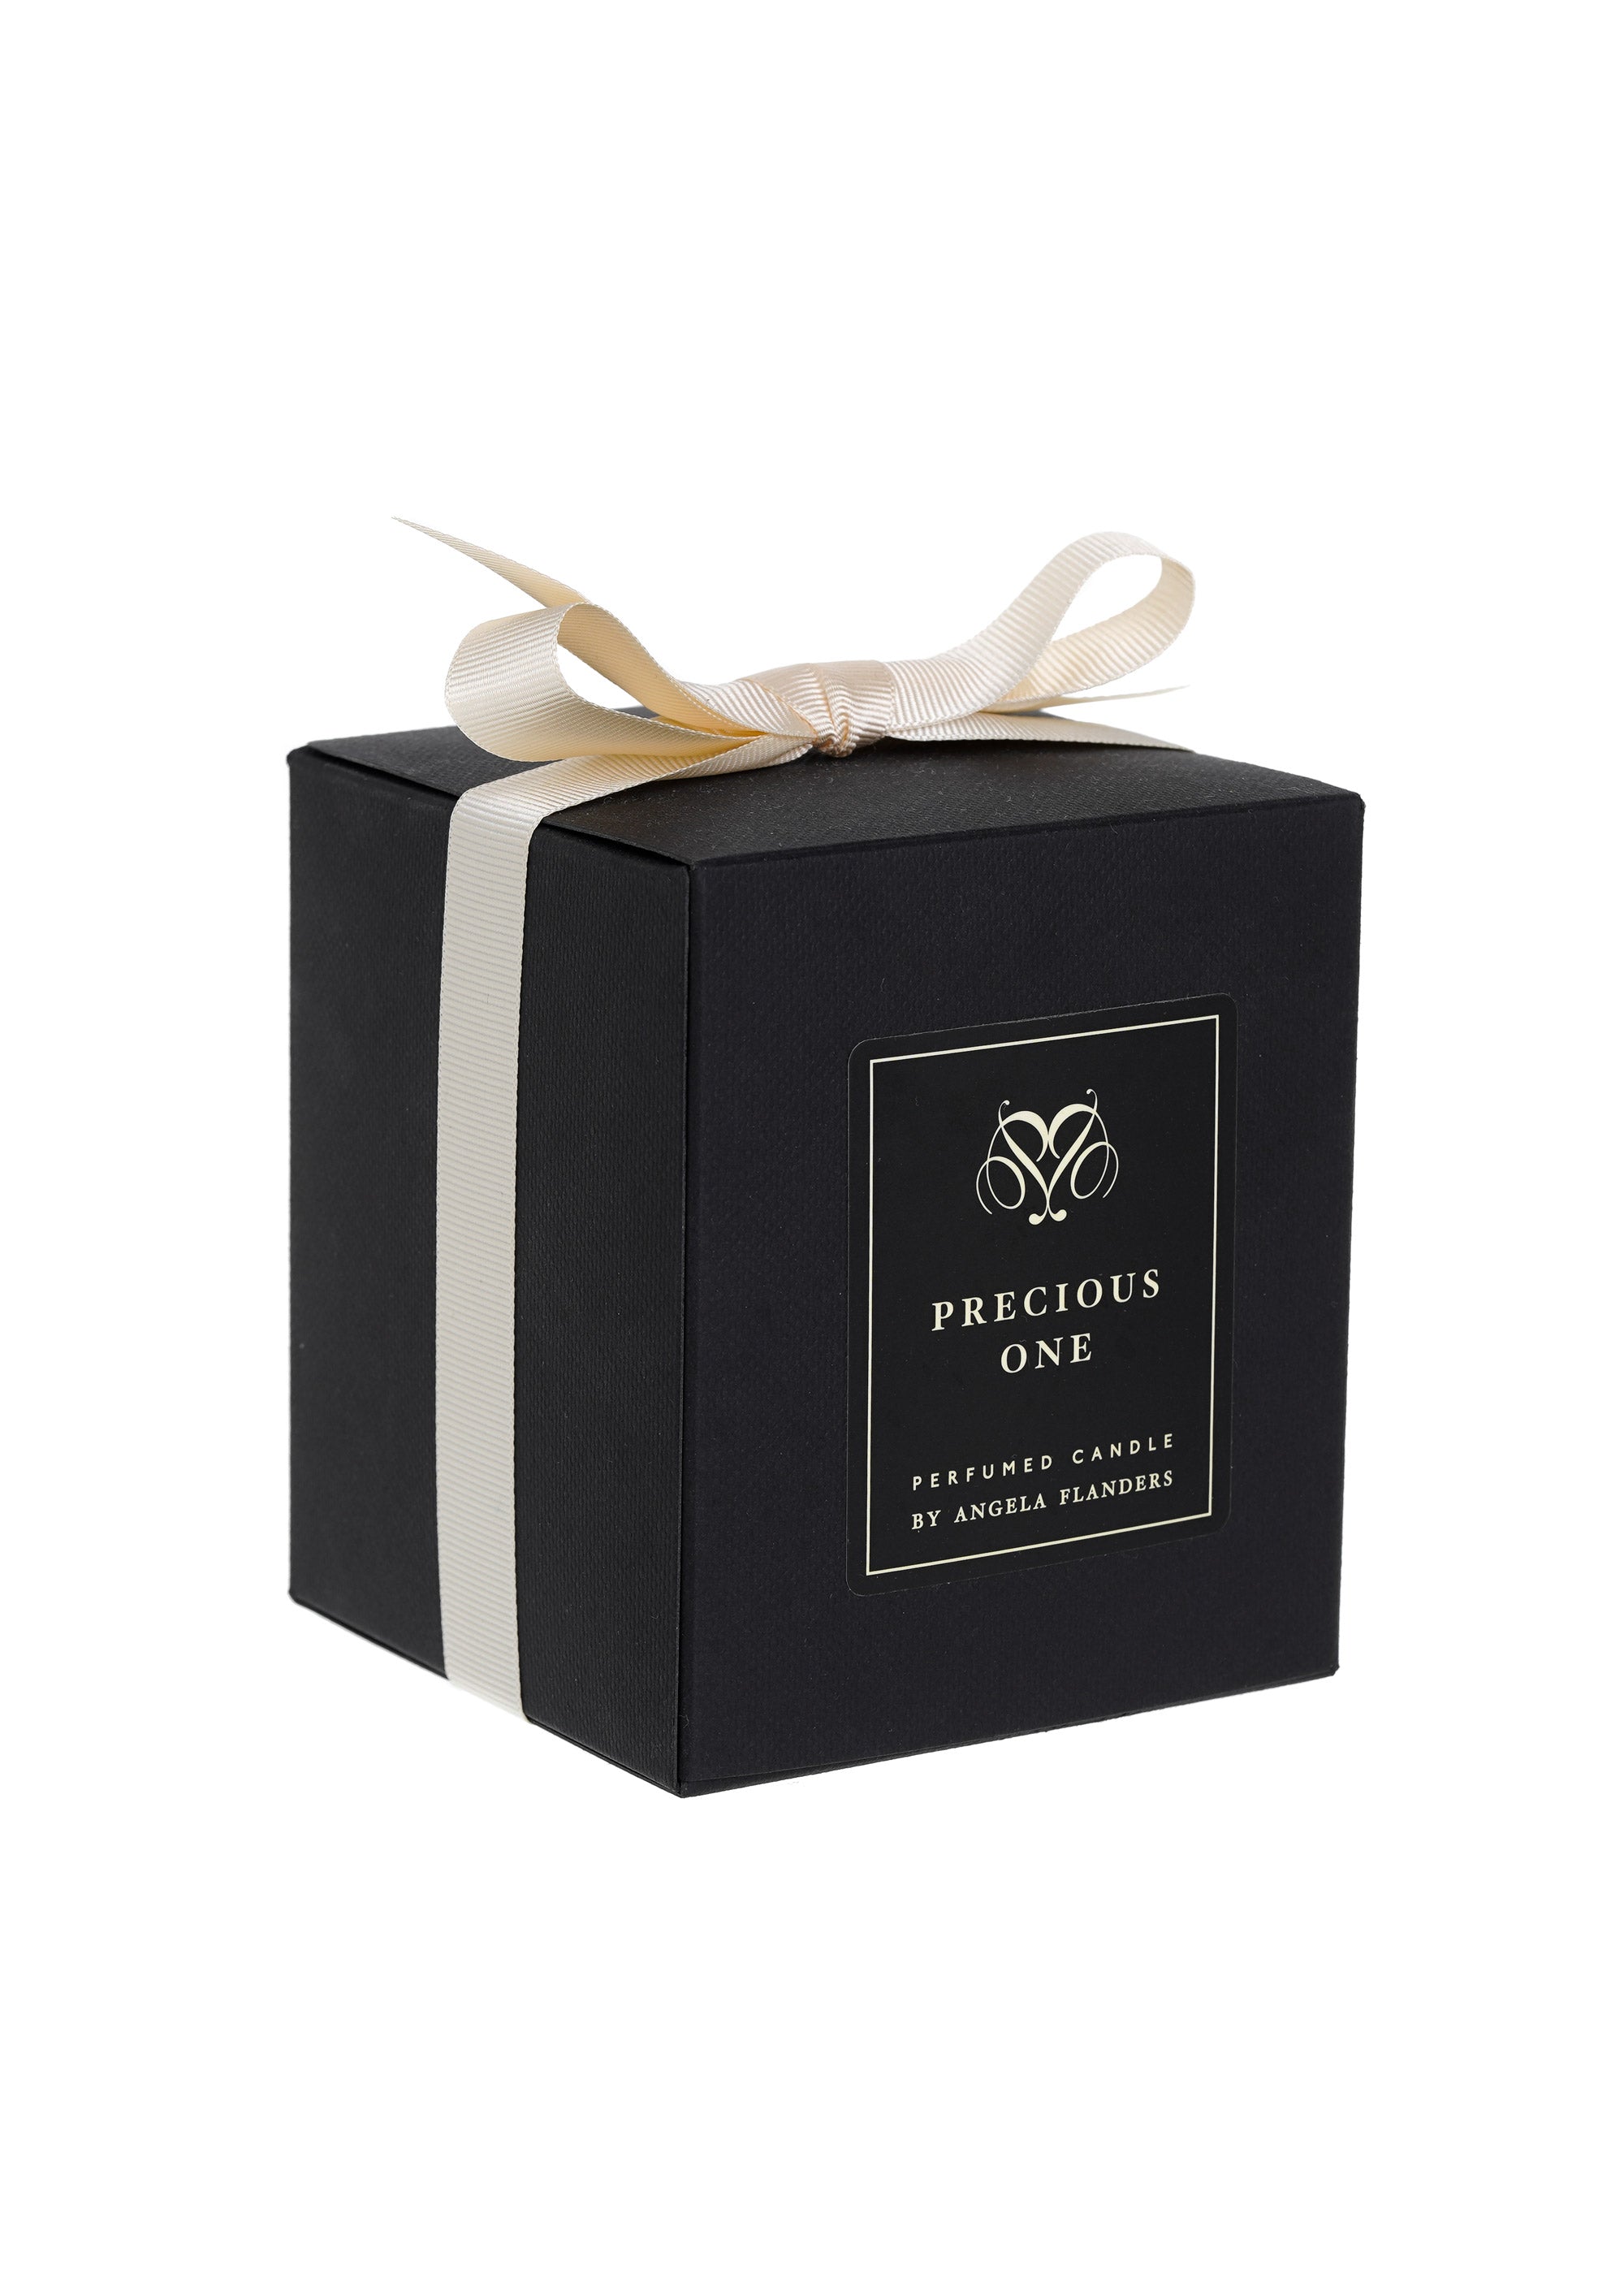 Precious One Perfumed Candle